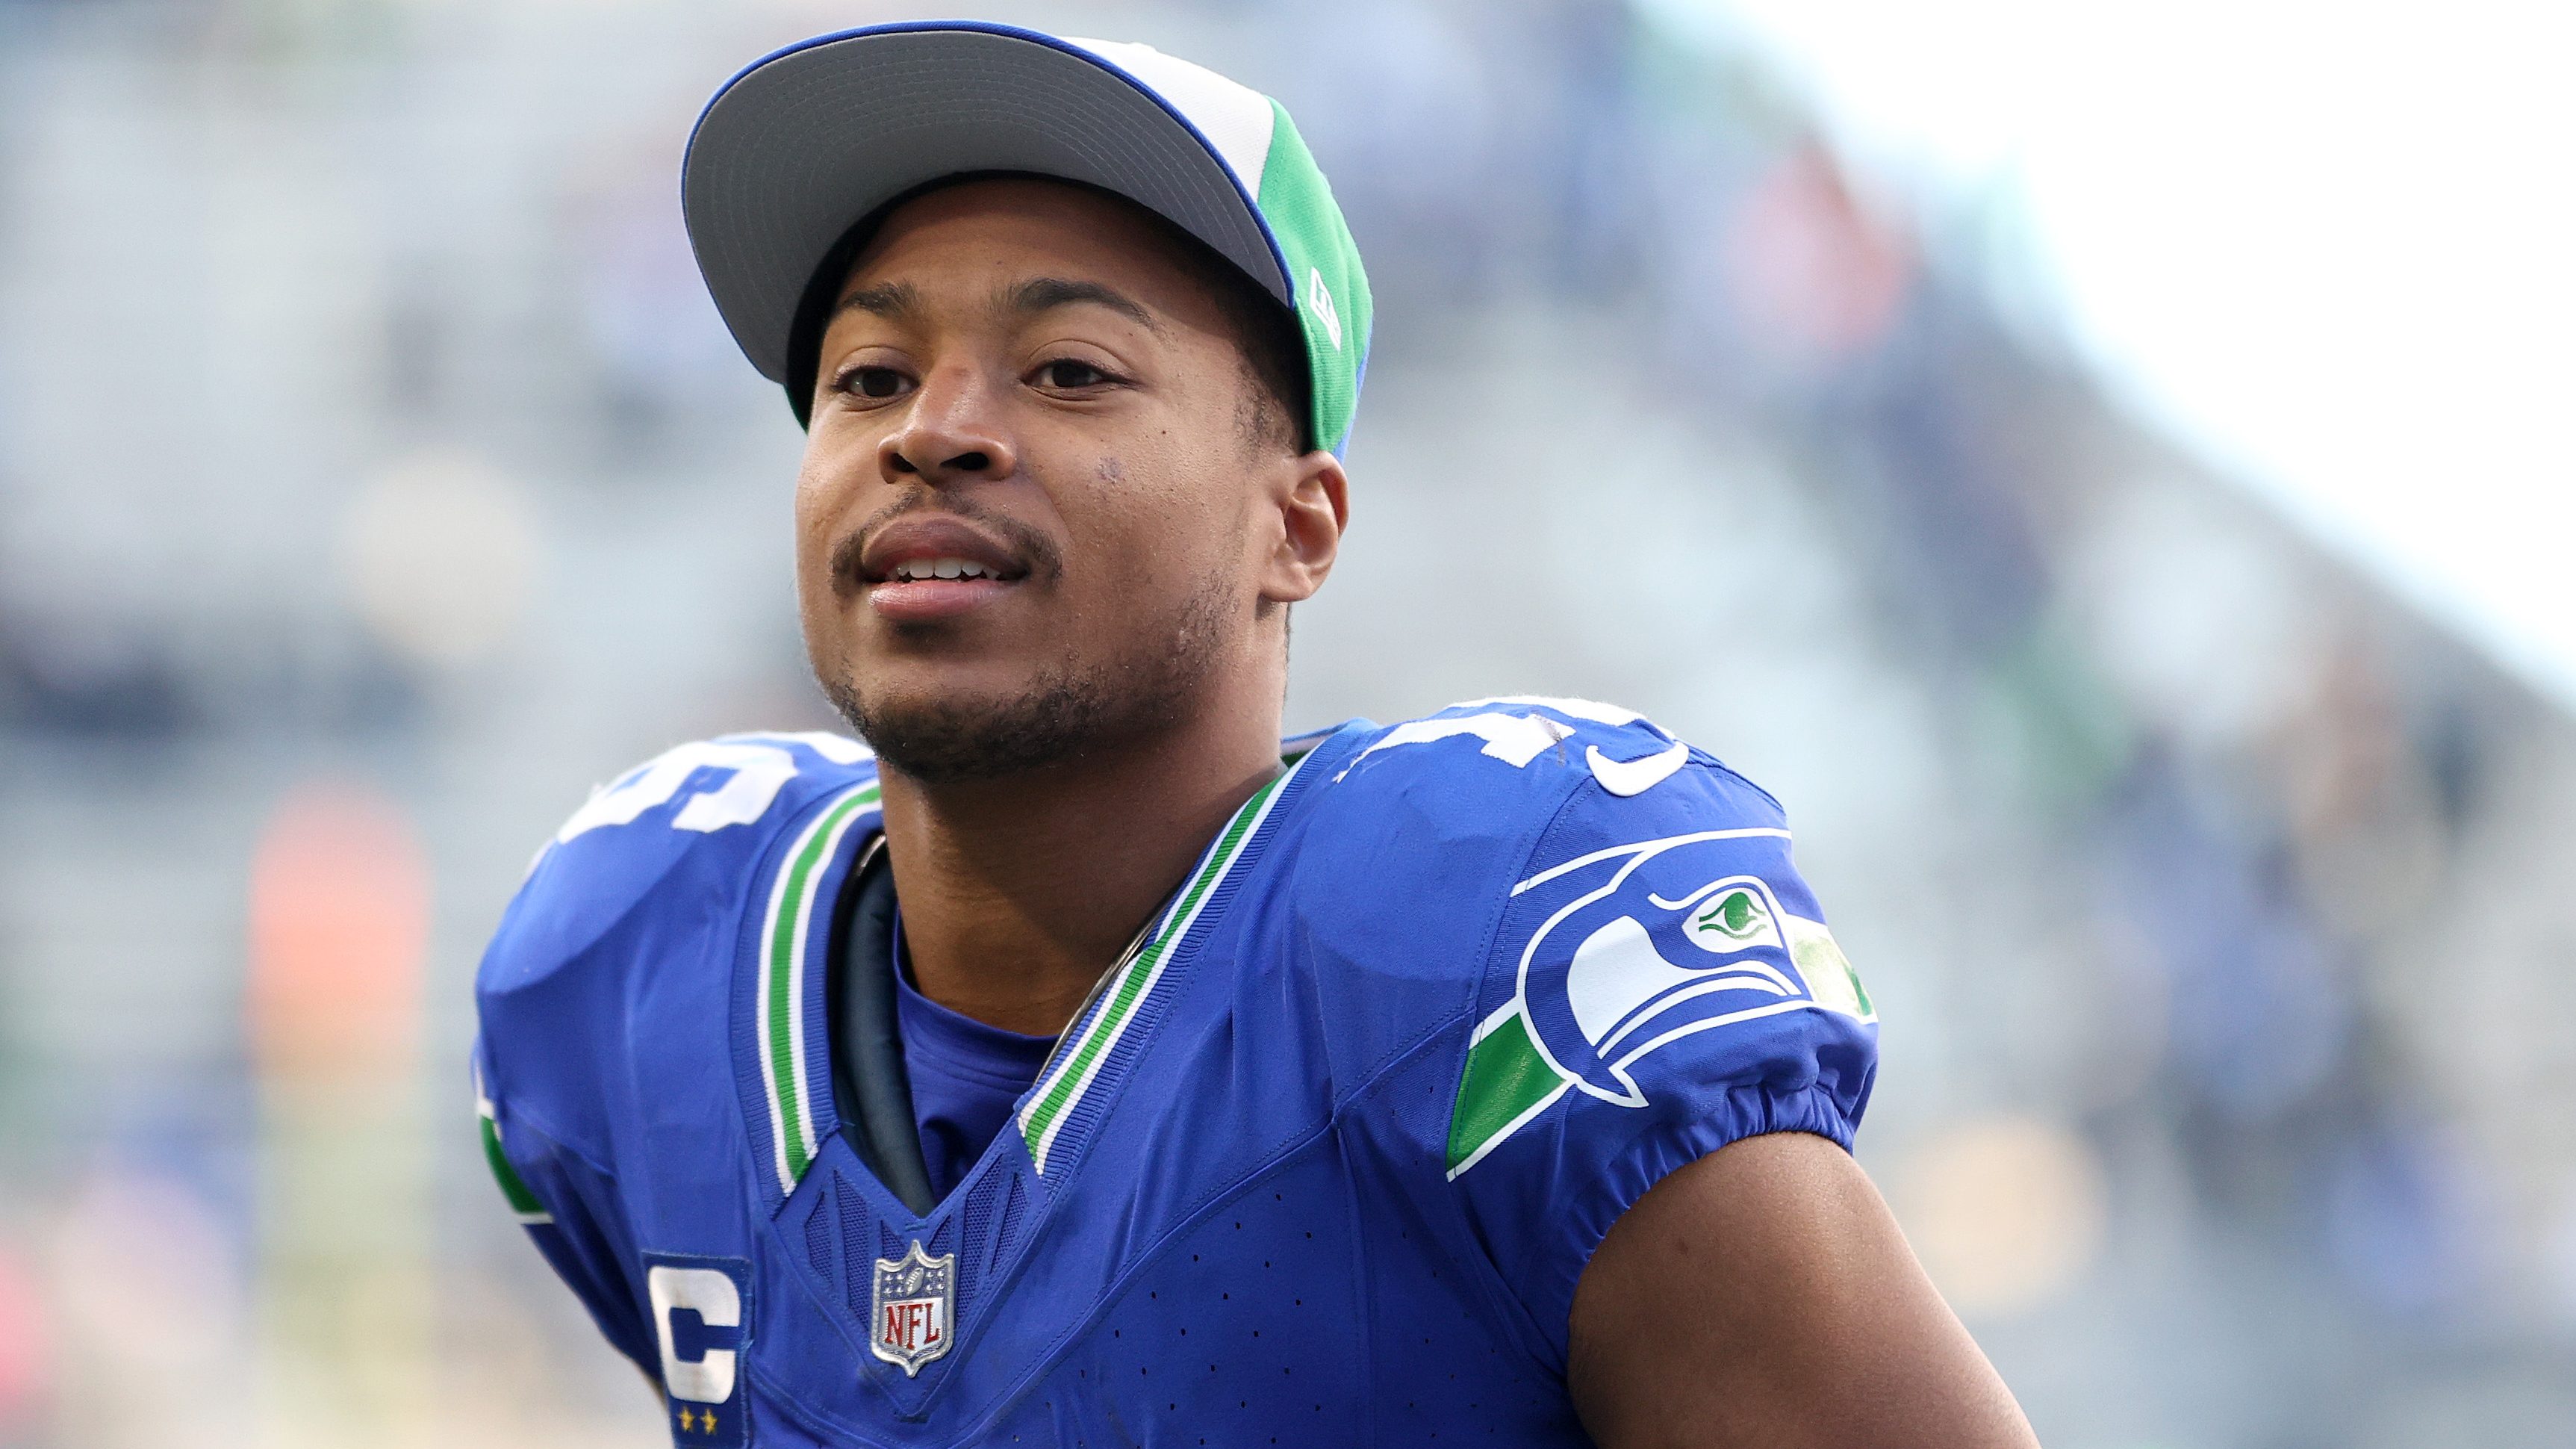 Should the Patriots pursue a trade for Seattle WR Tyler Lockett?